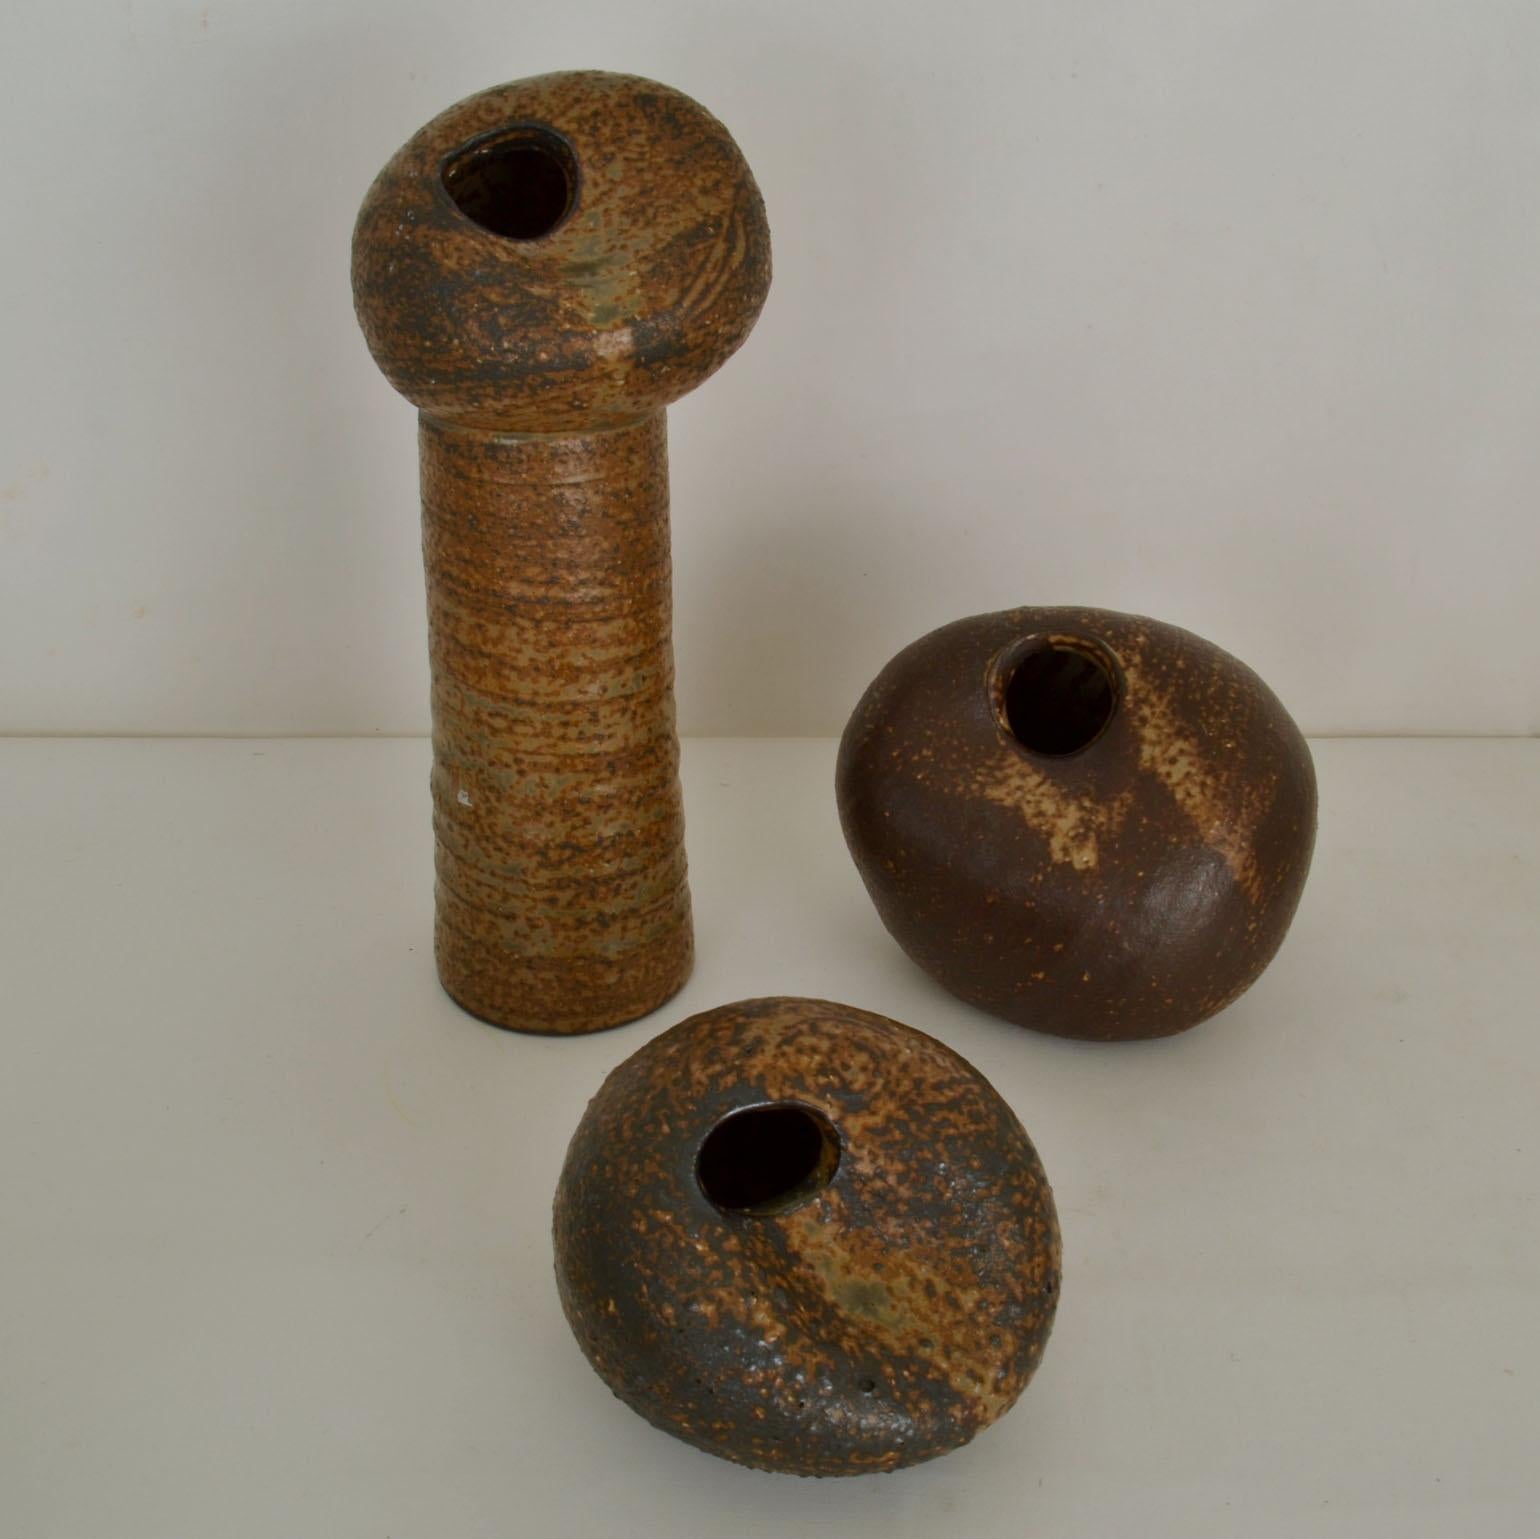 Group of Studio Ceramic Free Form Pebble Vases in Earth Tones by Jaan Mobach For Sale 6